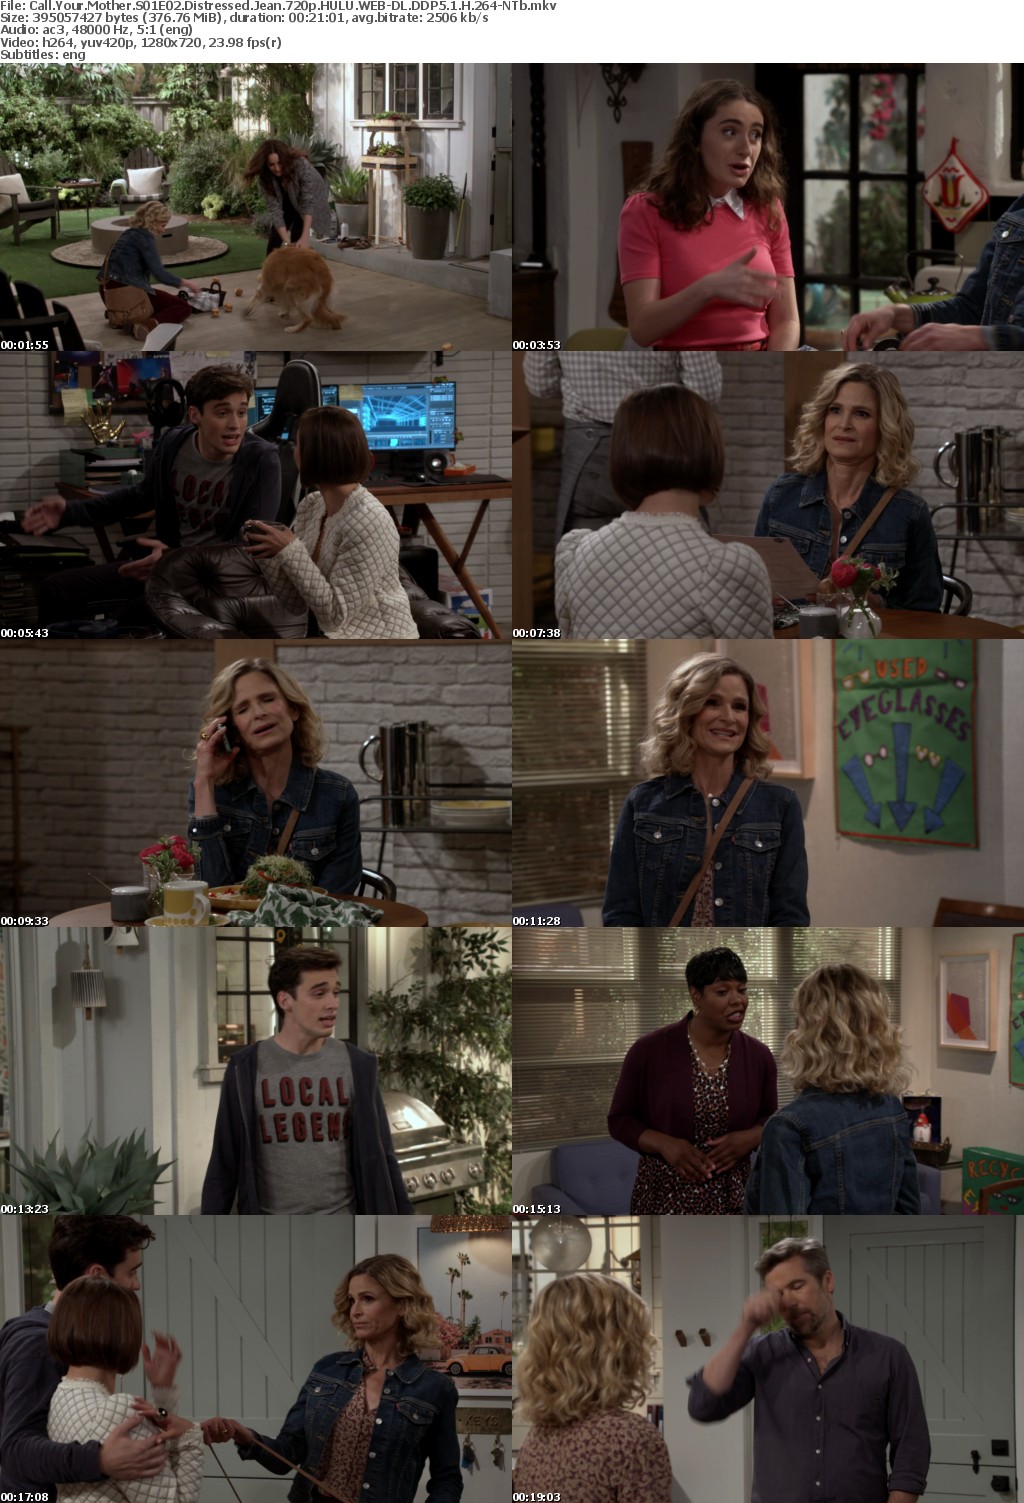 Call Your Mother S01E02 Distressed Jean 720p HULU WEB-DL DDP5 1 H 264-NTb